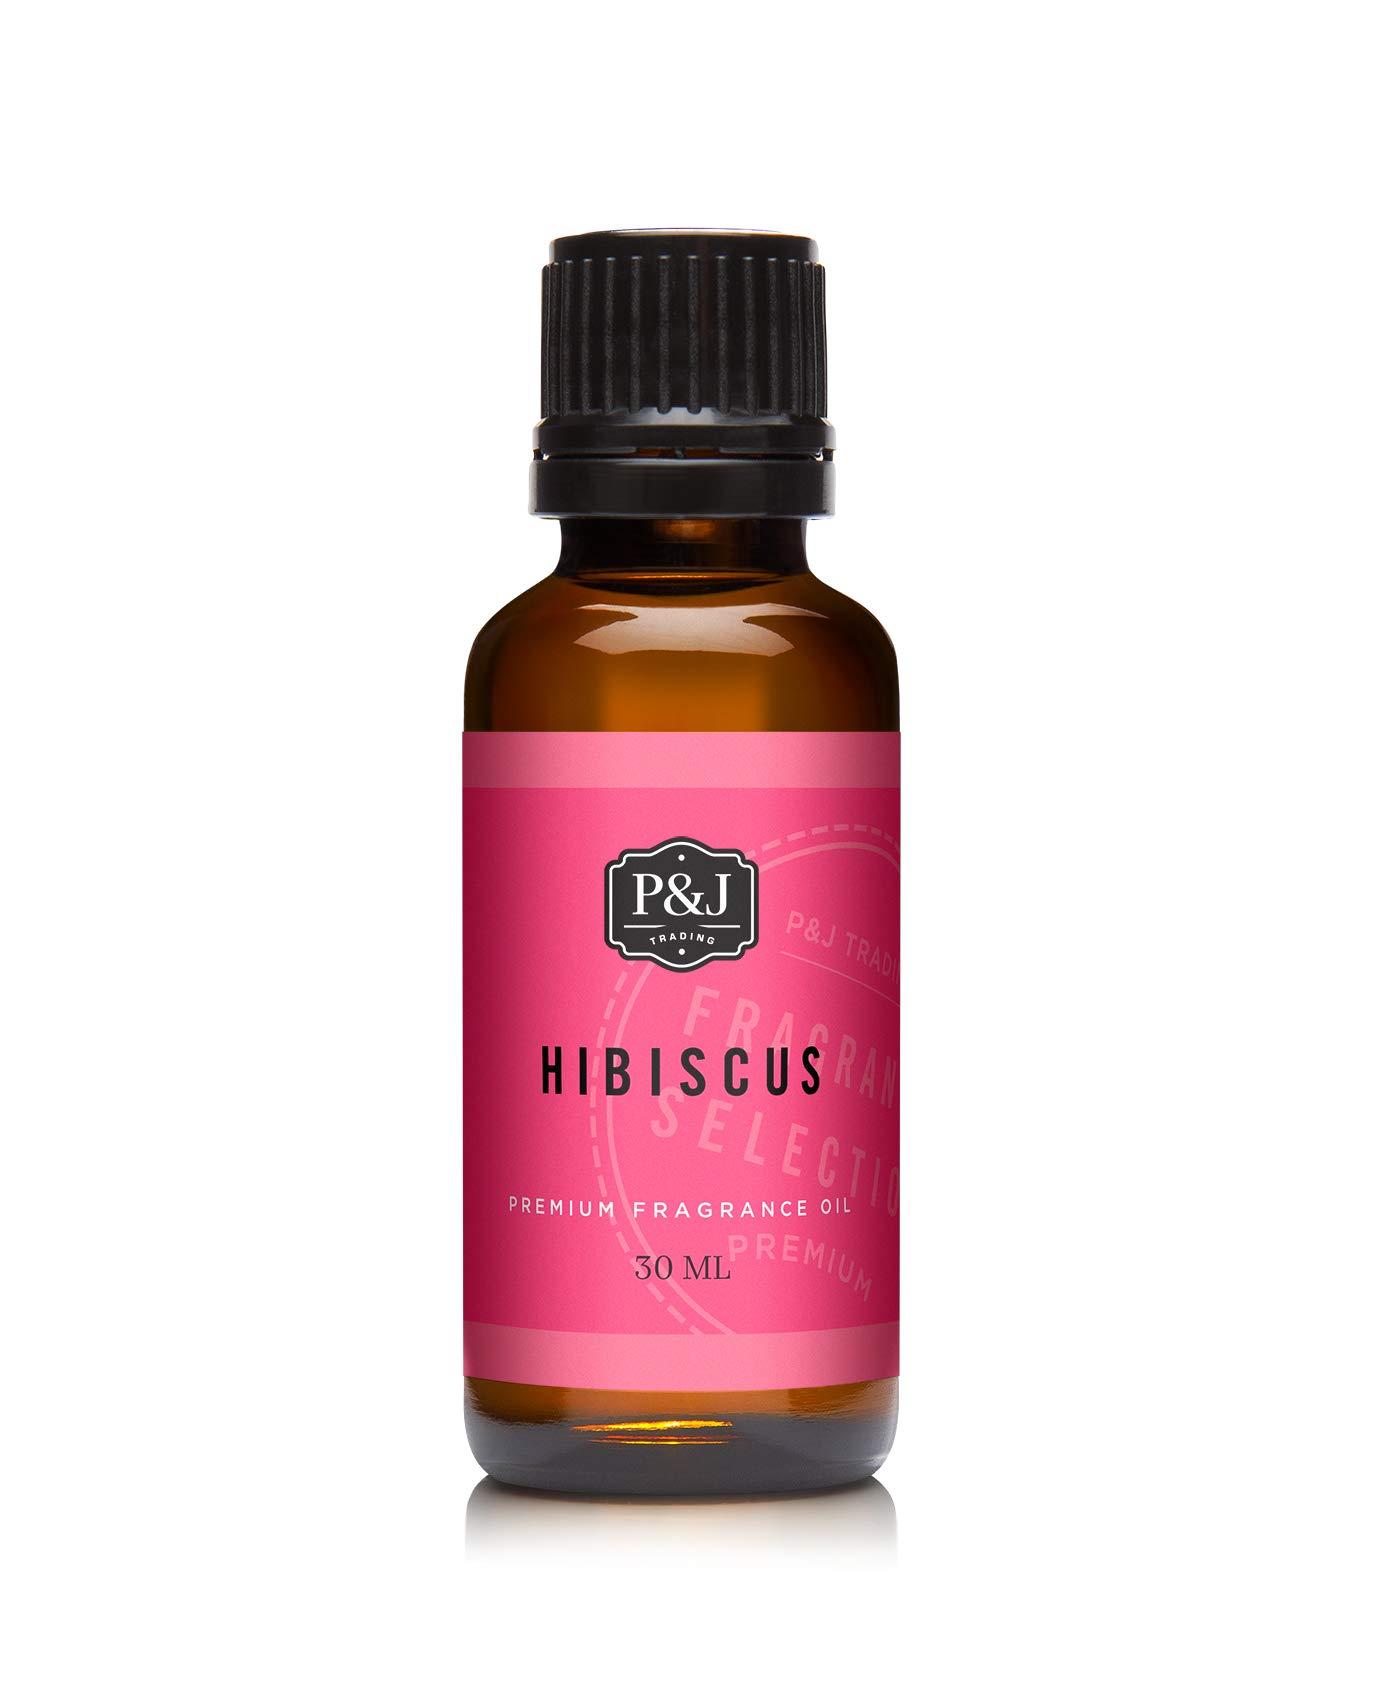 P&J Fragrance Oil  Hibiscus 30ml - Scented Oil for Soap Making Diffusers  Candle Making Lotions Haircare Slime and Home Fragrance